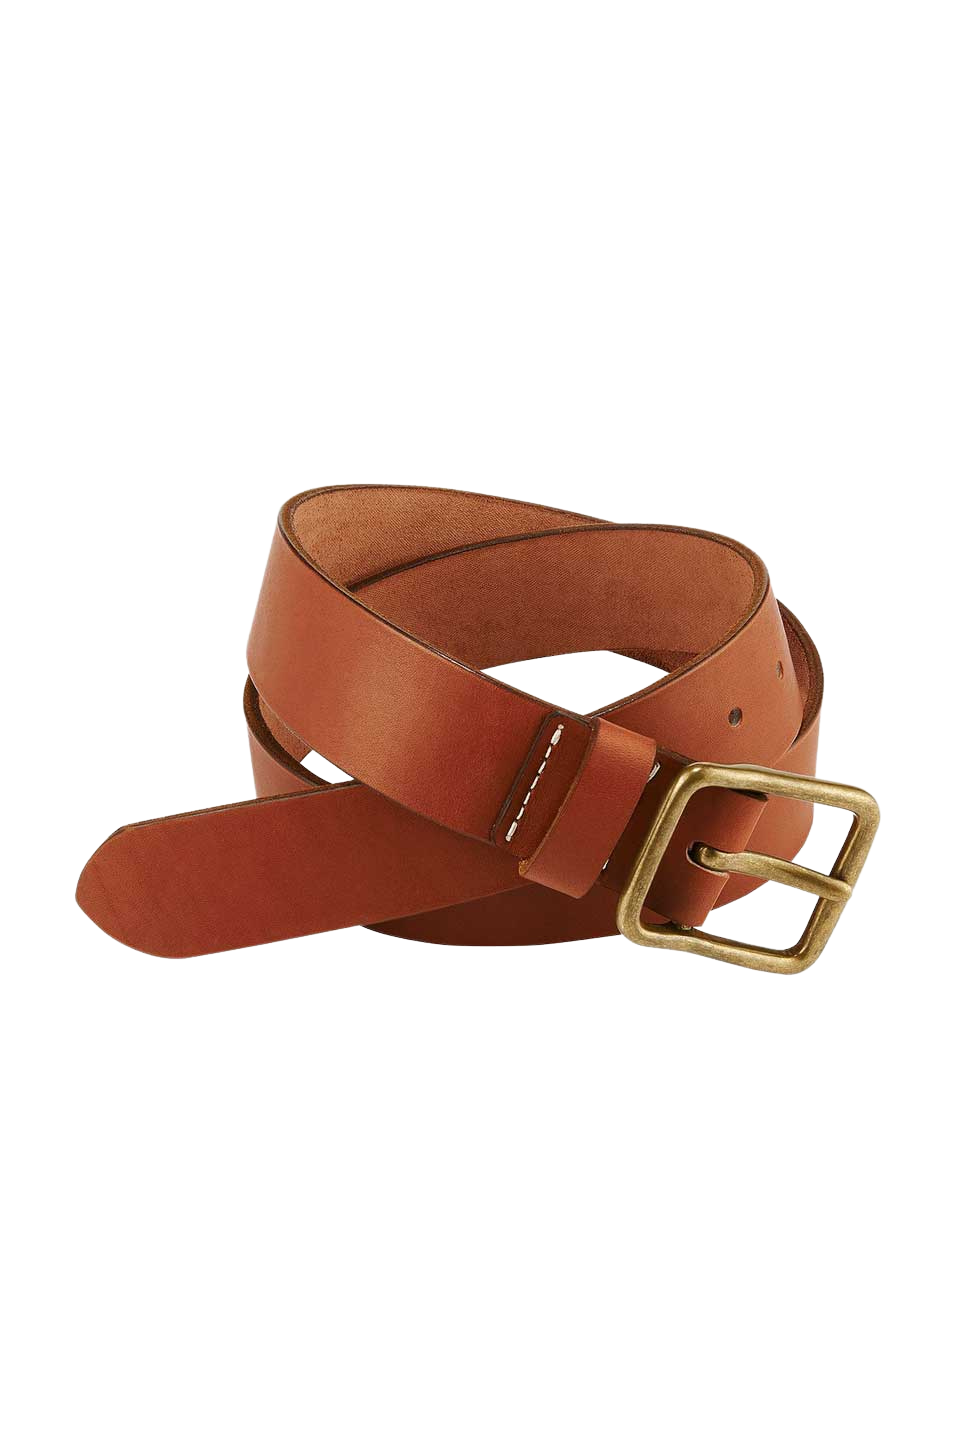 RED WING LEATHER BELT